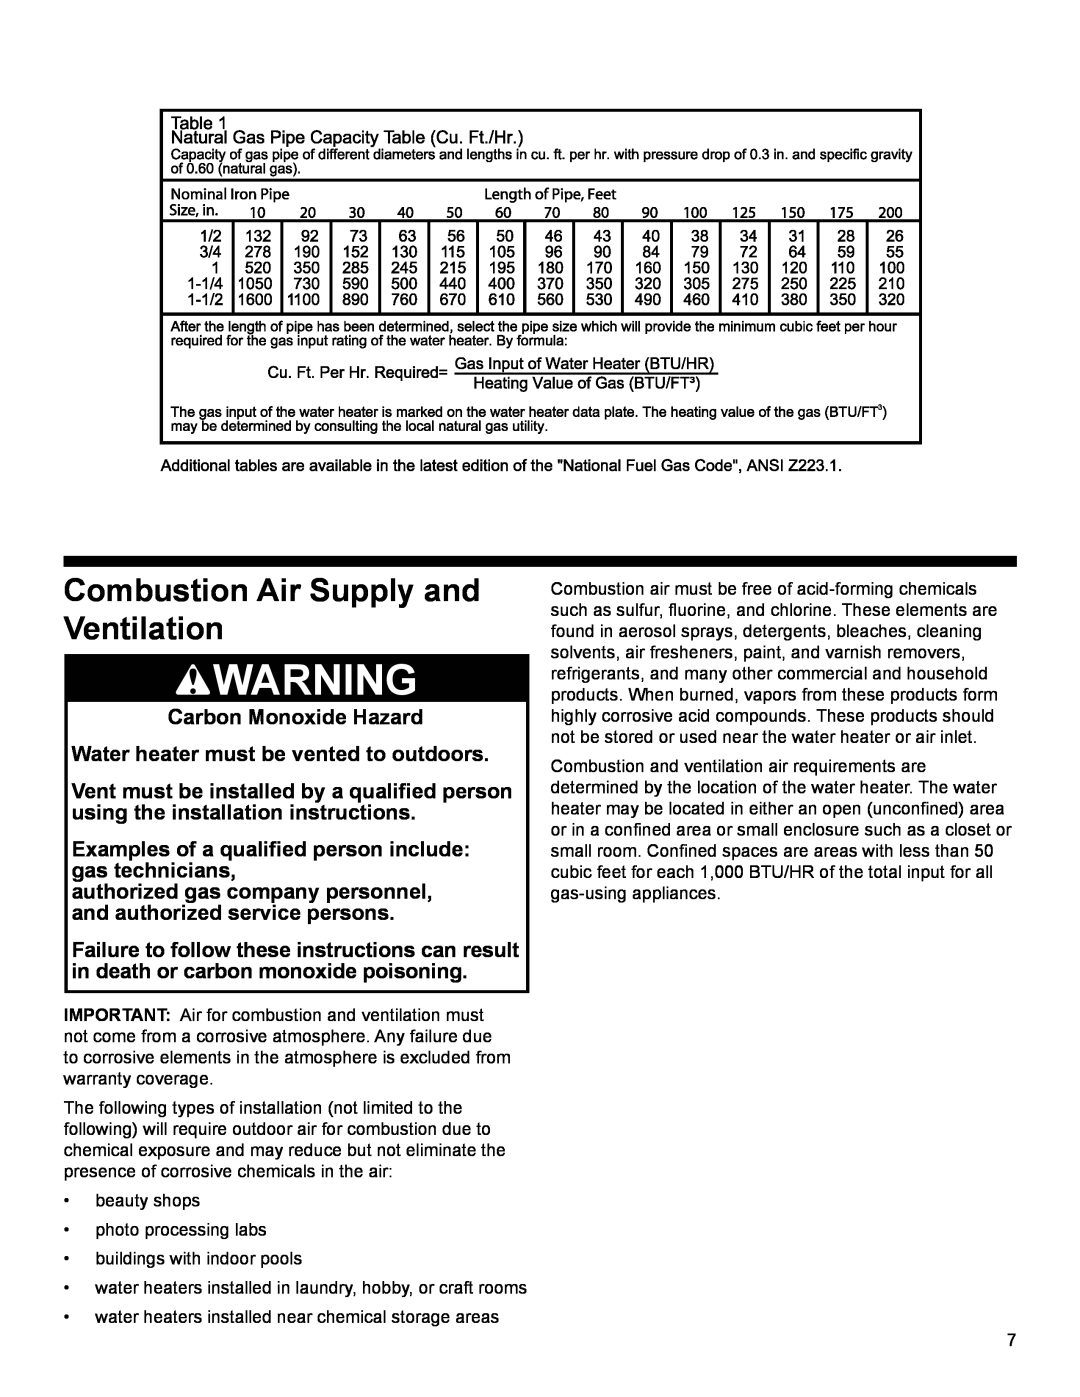 American Water Heater 318935-003 installation instructions Combustion Air Supply and Ventilation 